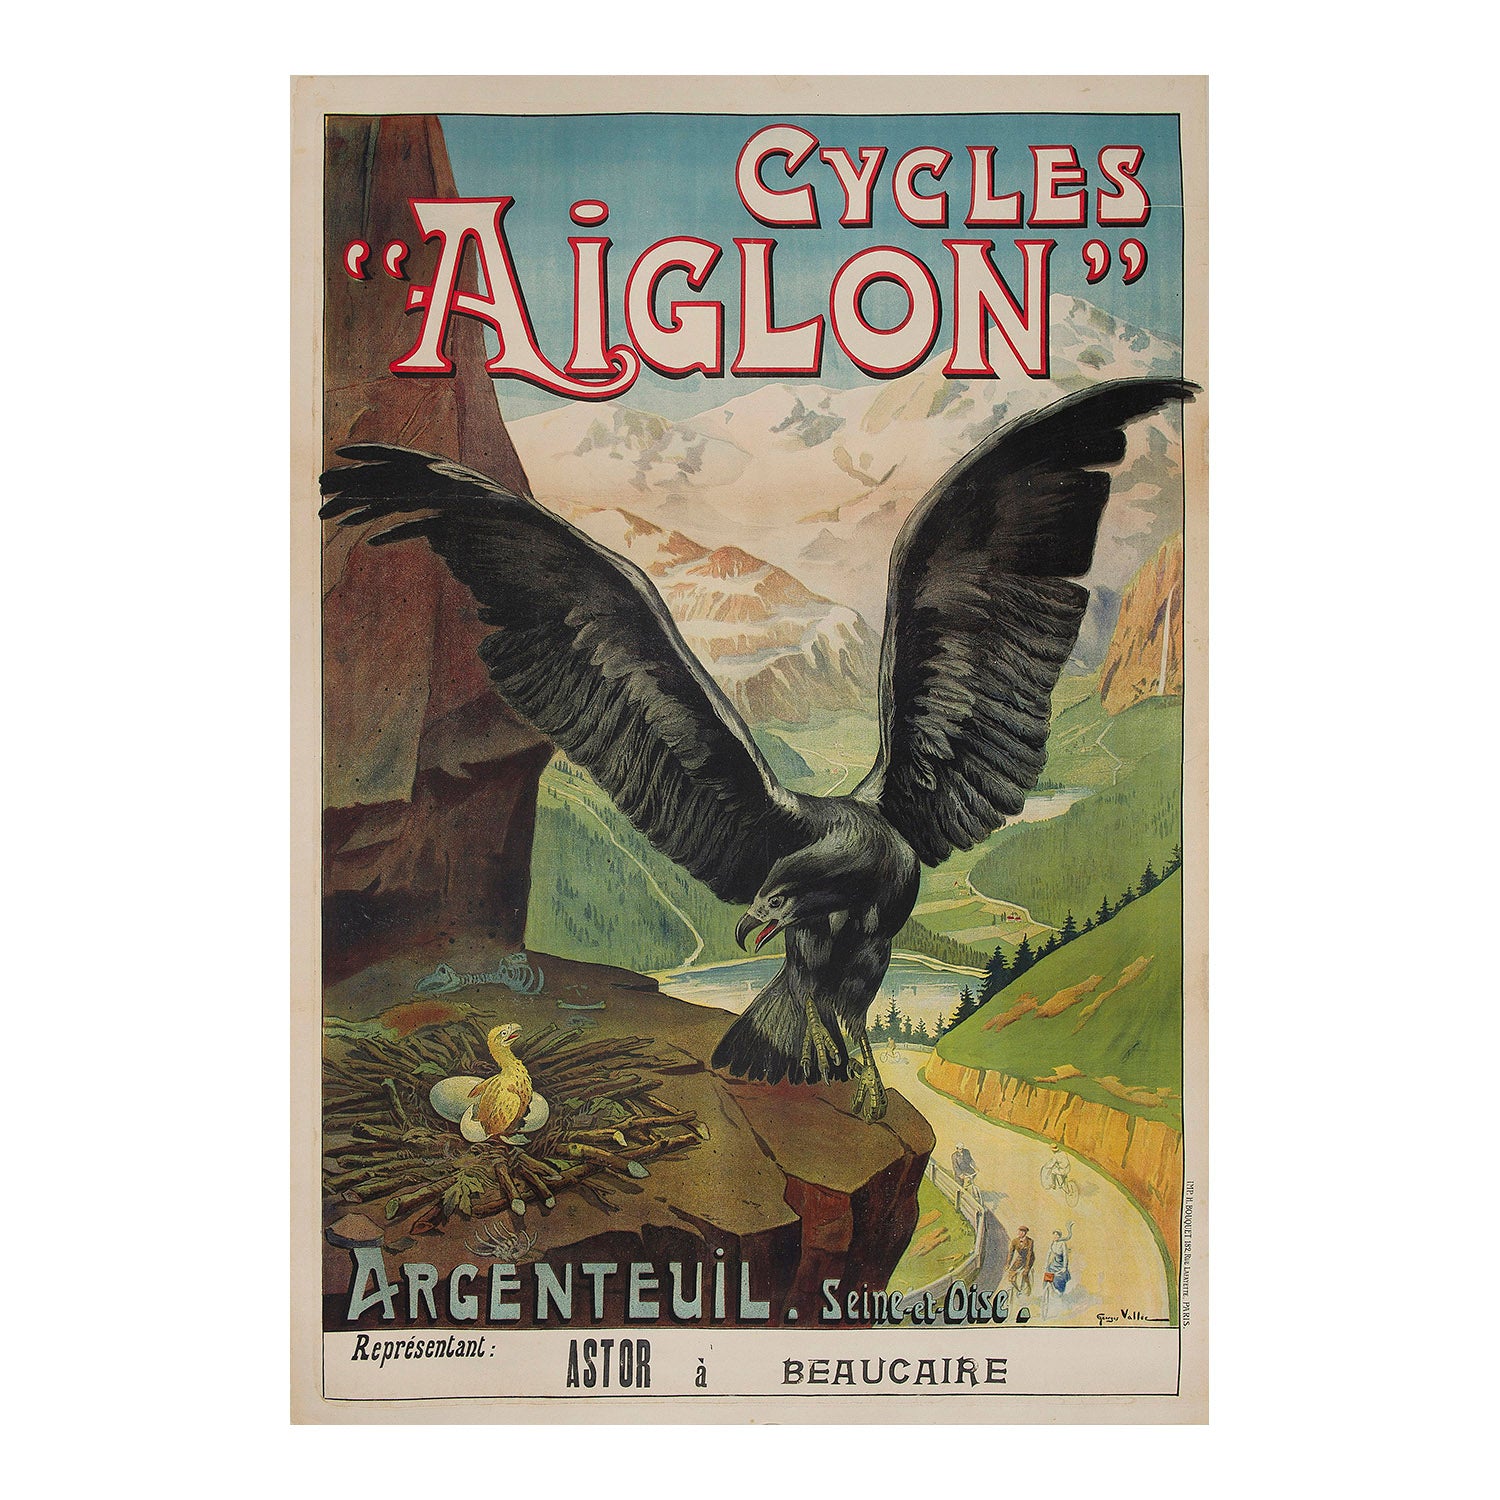 large format original French bicycle poster designed by Georges Vallée for Aiglon Cycles, c. 1901. Ealge in foreground against mountainous terrain